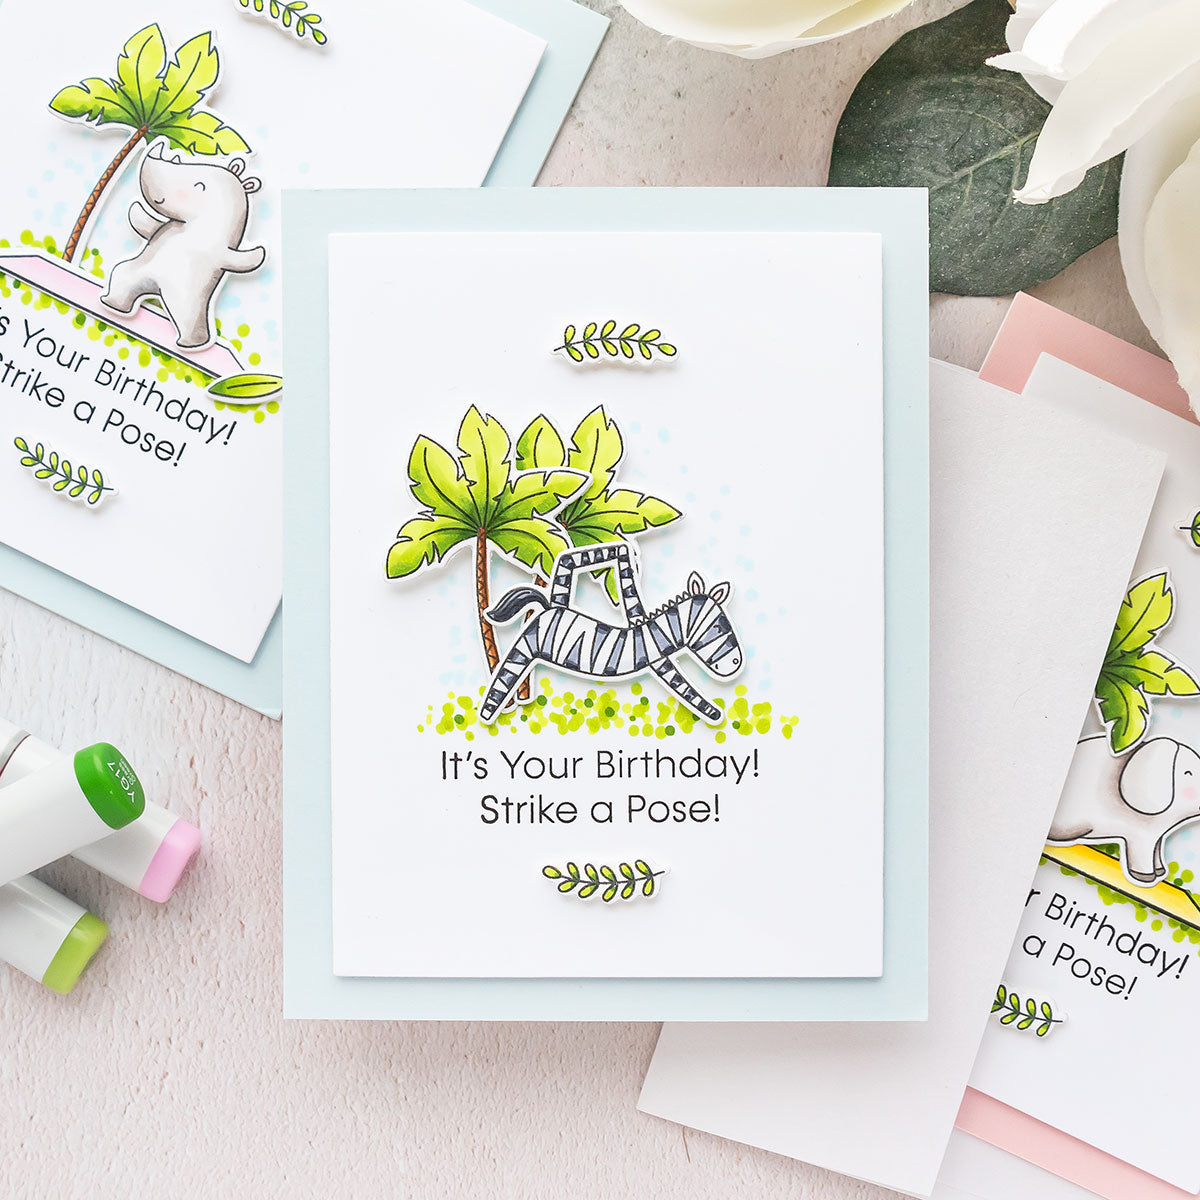 Handmade cards from Yana Smakula featuring products from My Favorite Things #mftstamps